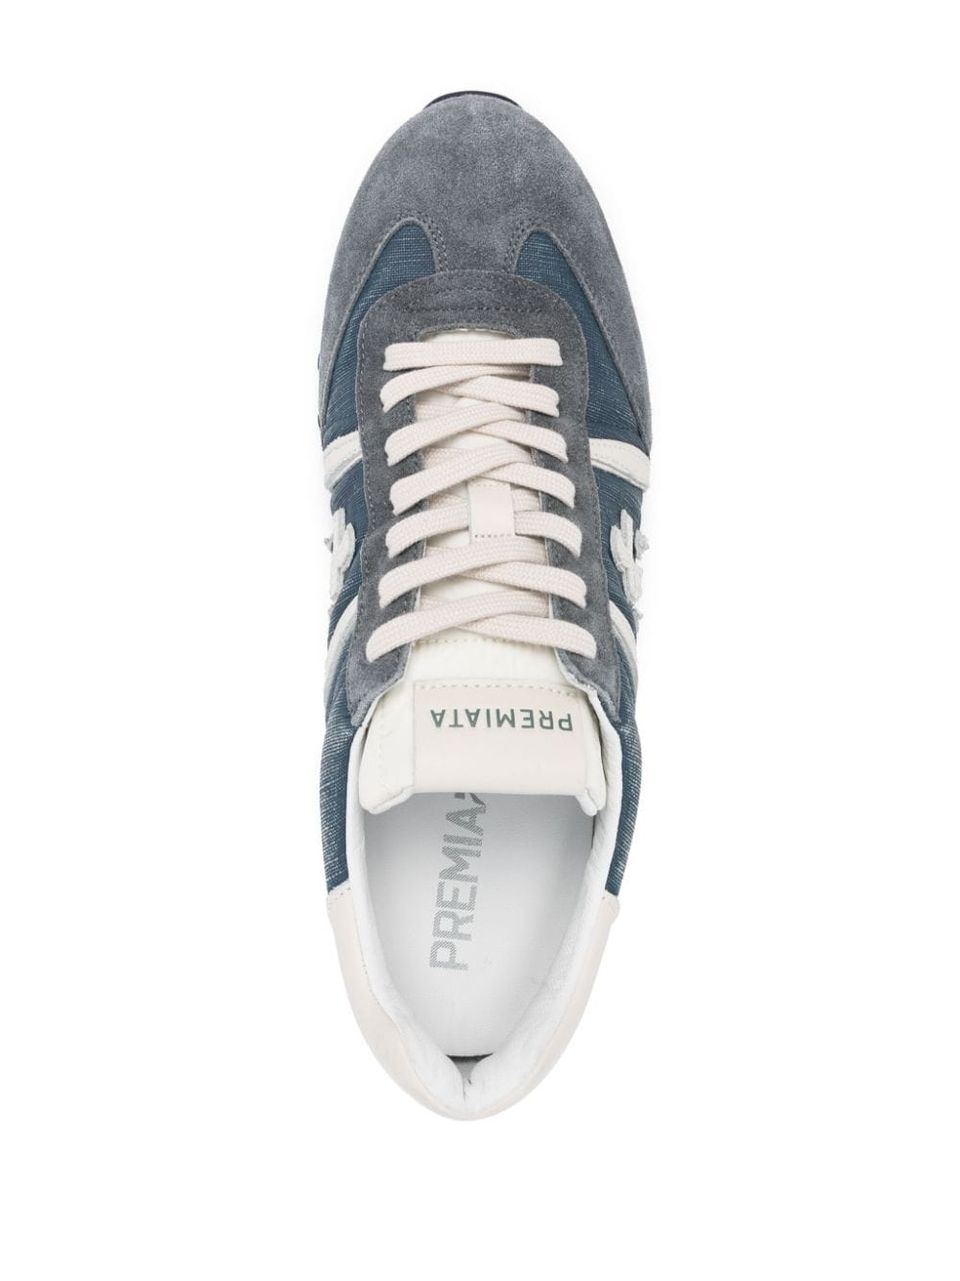 'Lucy 6620' sneakers